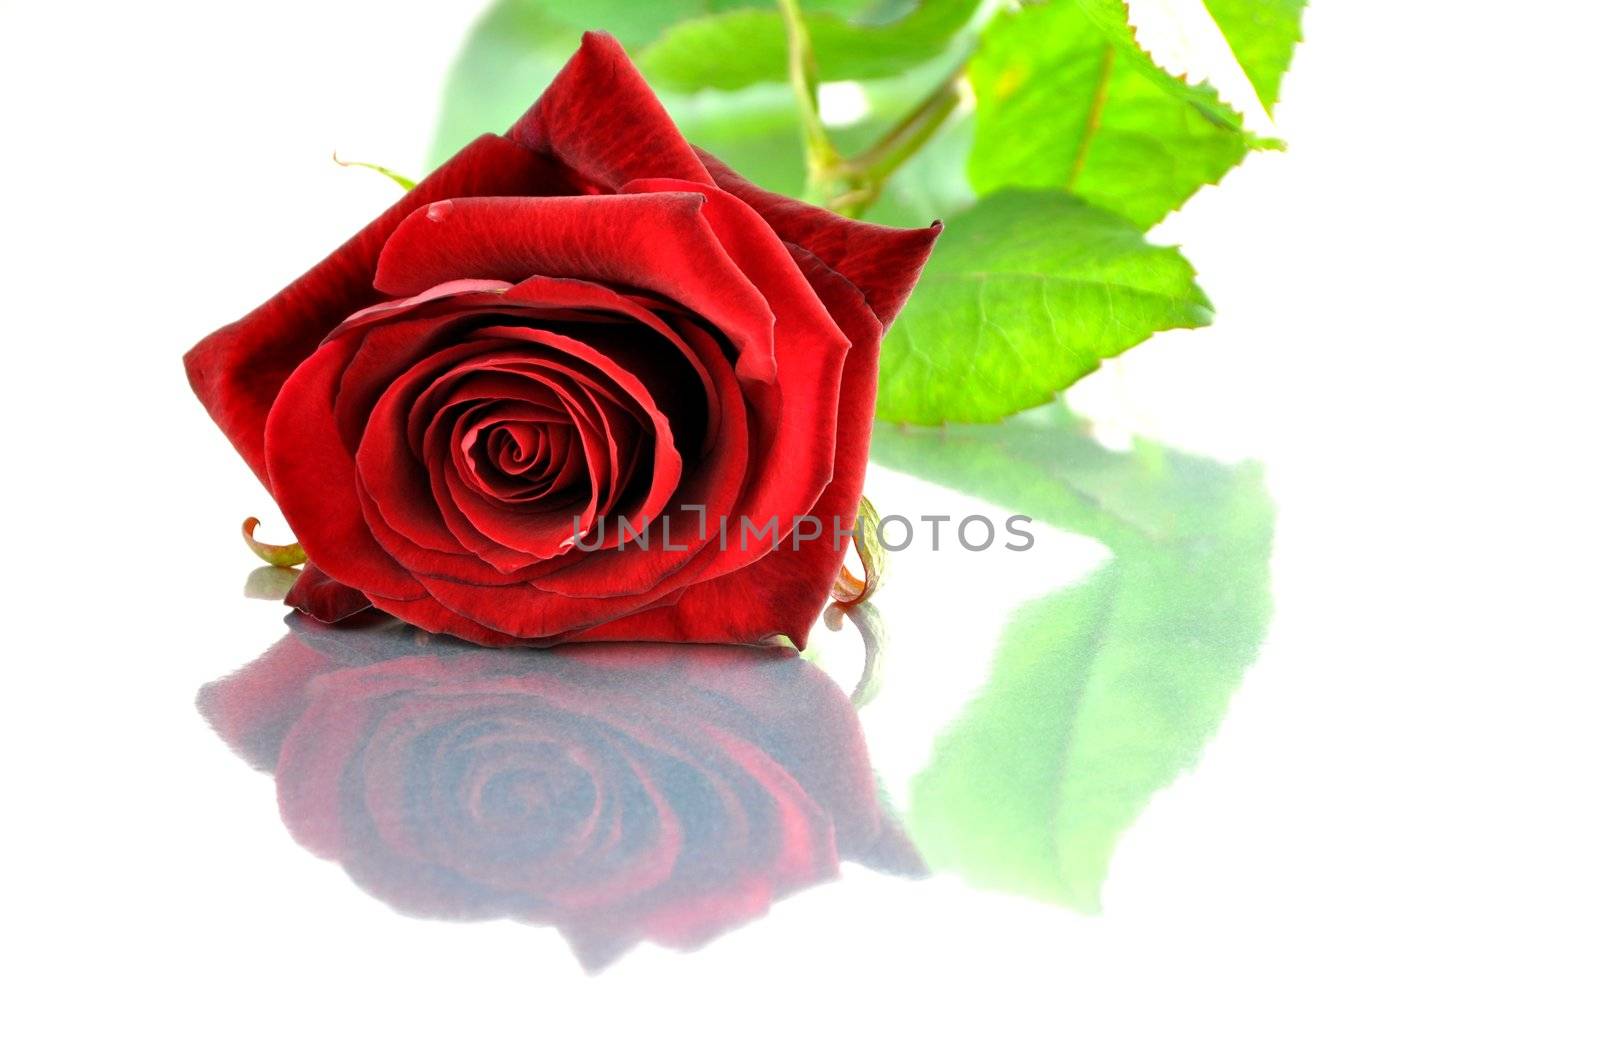 A single red rose and its reflection